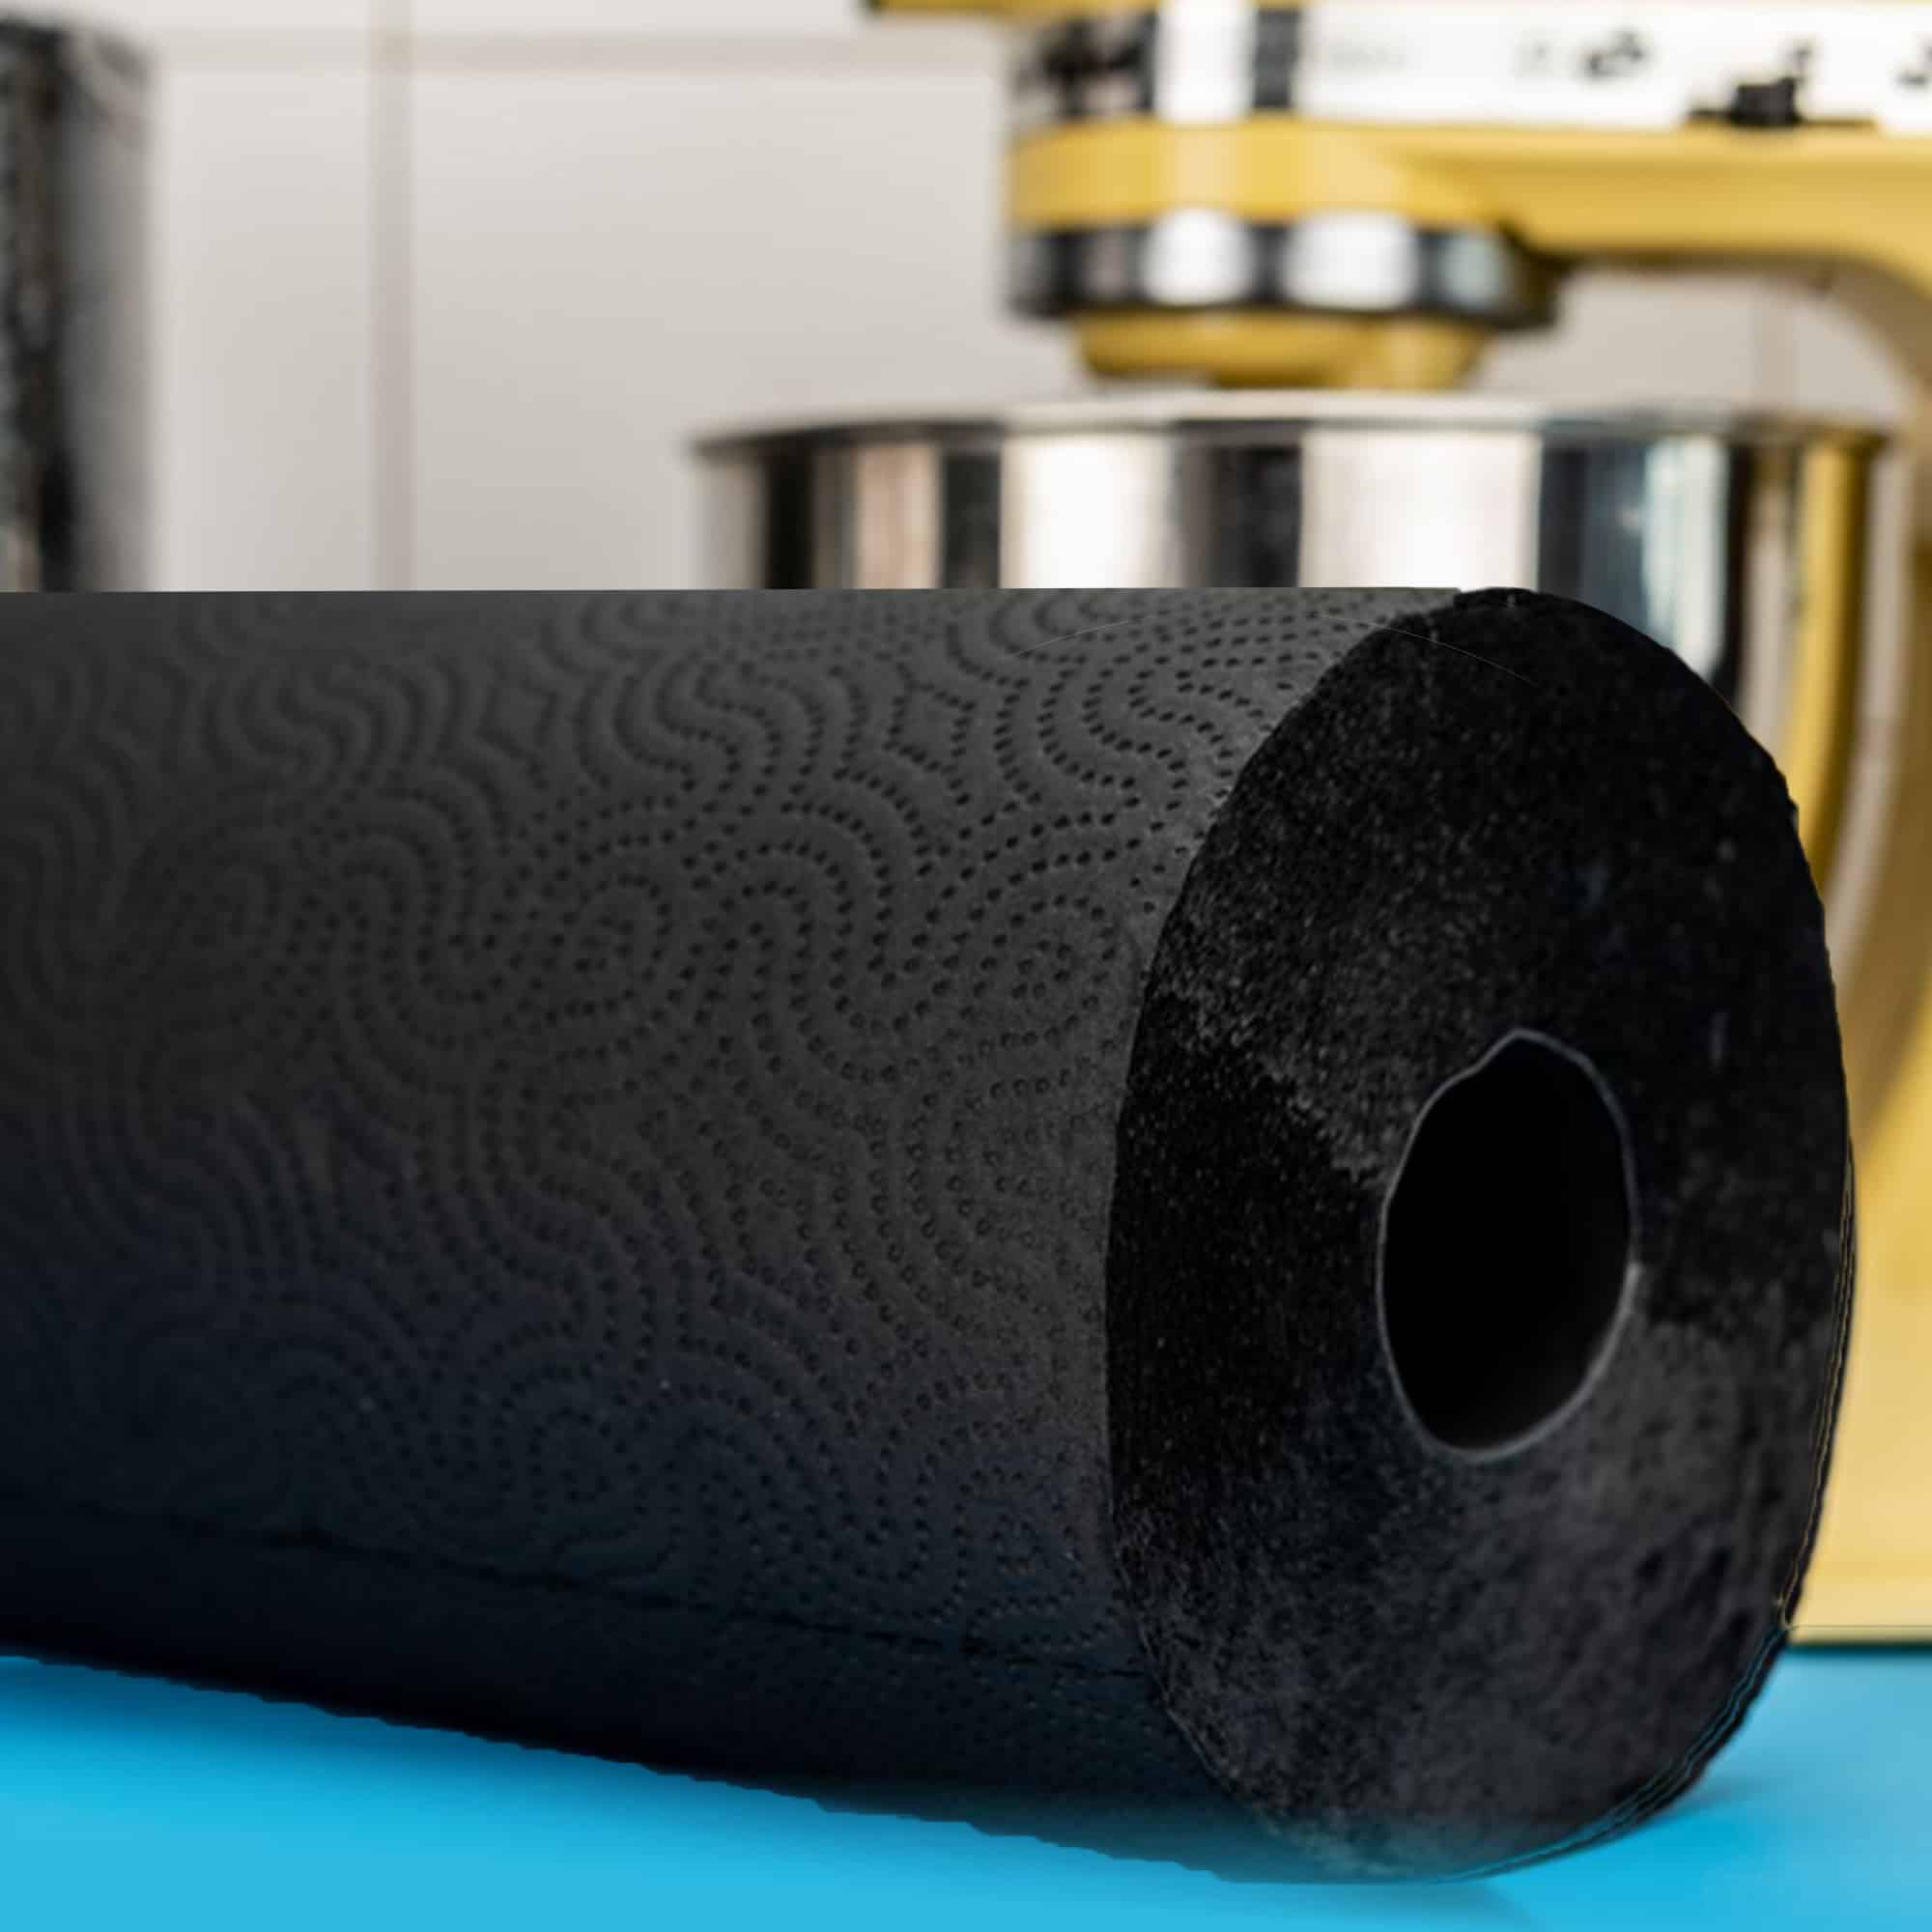 https://roll-lux.com/wp-content/uploads/2020/06/RGB200071800SET6-Black-Paper-Towel-Jumbo-Roll-2-Ply-120-Highly-Absorbent-Sheets-Set-of-6-2-2.jpg